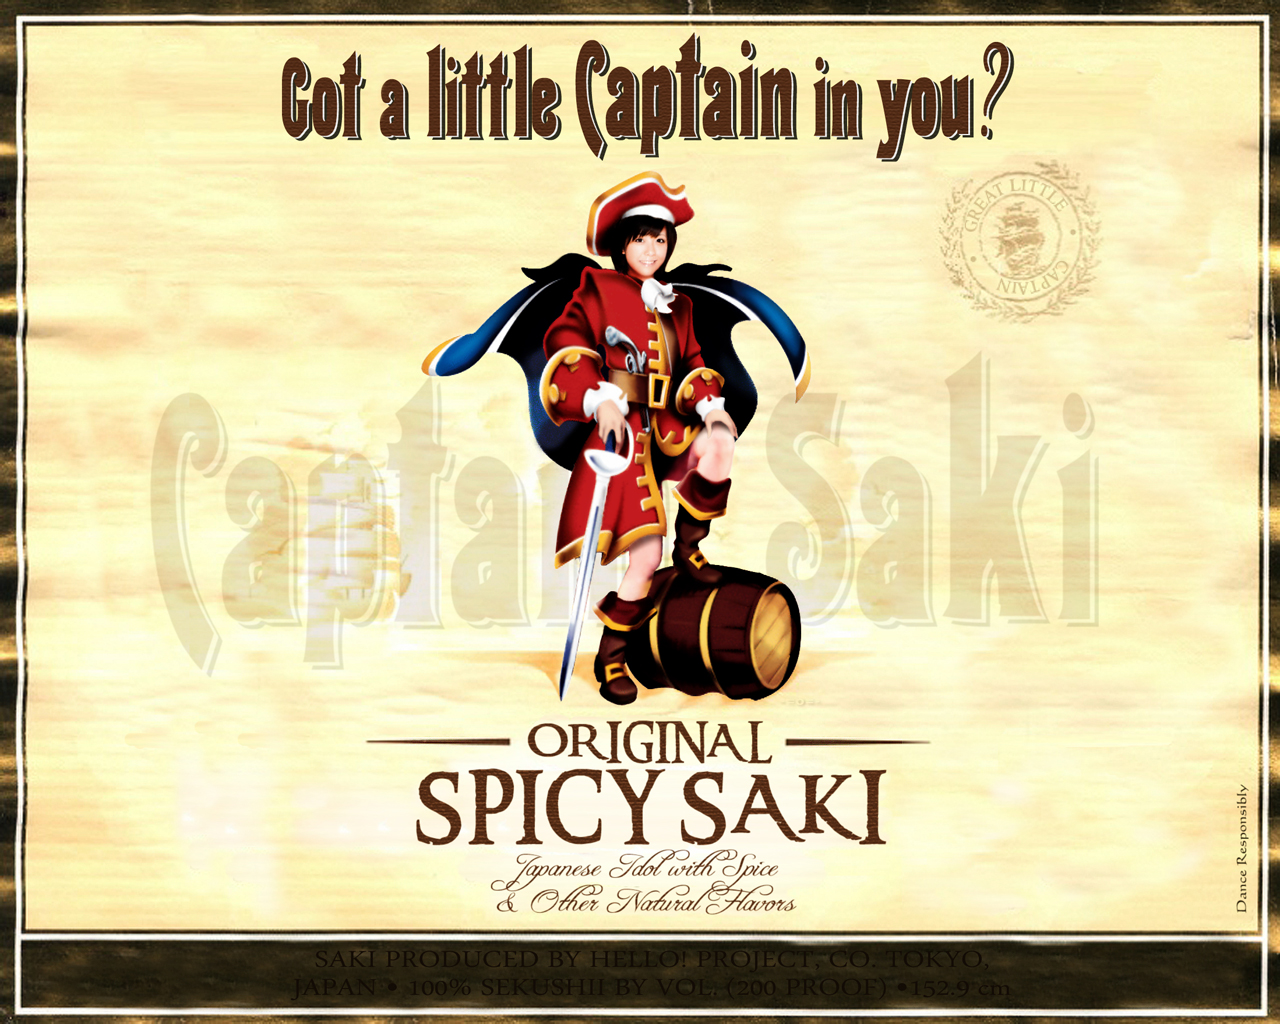 Got a little Captain in you?